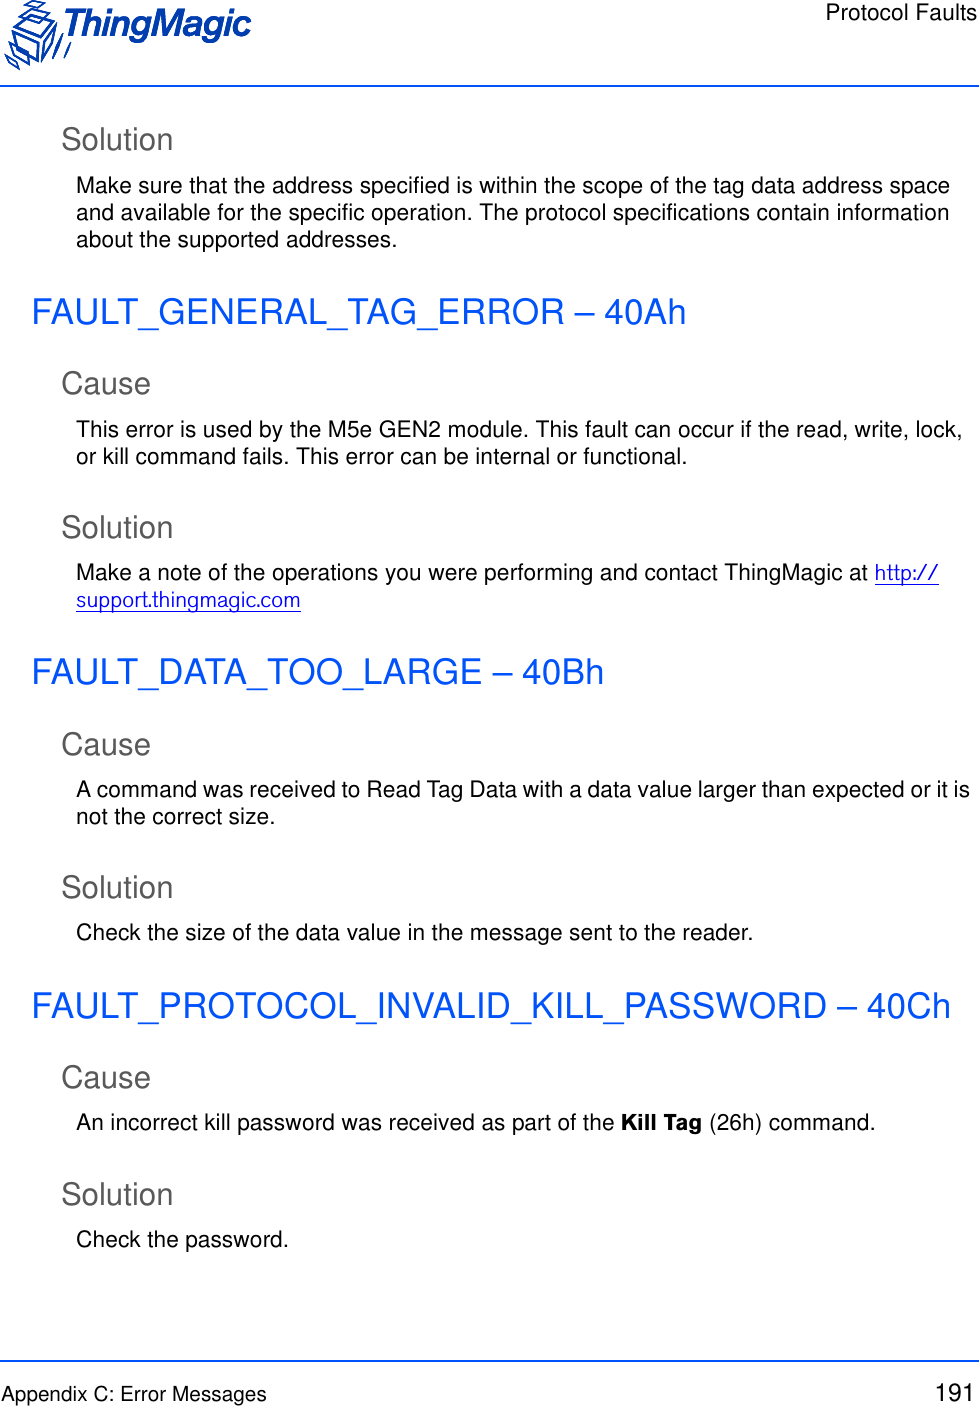 Protocol FaultsAppendix C: Error Messages 191SolutionMake sure that the address specified is within the scope of the tag data address space and available for the specific operation. The protocol specifications contain information about the supported addresses.FAULT_GENERAL_TAG_ERROR – 40AhCauseThis error is used by the M5e GEN2 module. This fault can occur if the read, write, lock, or kill command fails. This error can be internal or functional.SolutionMake a note of the operations you were performing and contact ThingMagic at http://support.thingmagic.comFAULT_DATA_TOO_LARGE – 40BhCauseA command was received to Read Tag Data with a data value larger than expected or it is not the correct size.SolutionCheck the size of the data value in the message sent to the reader.FAULT_PROTOCOL_INVALID_KILL_PASSWORD – 40ChCauseAn incorrect kill password was received as part of the Kill Tag (26h) command. SolutionCheck the password.